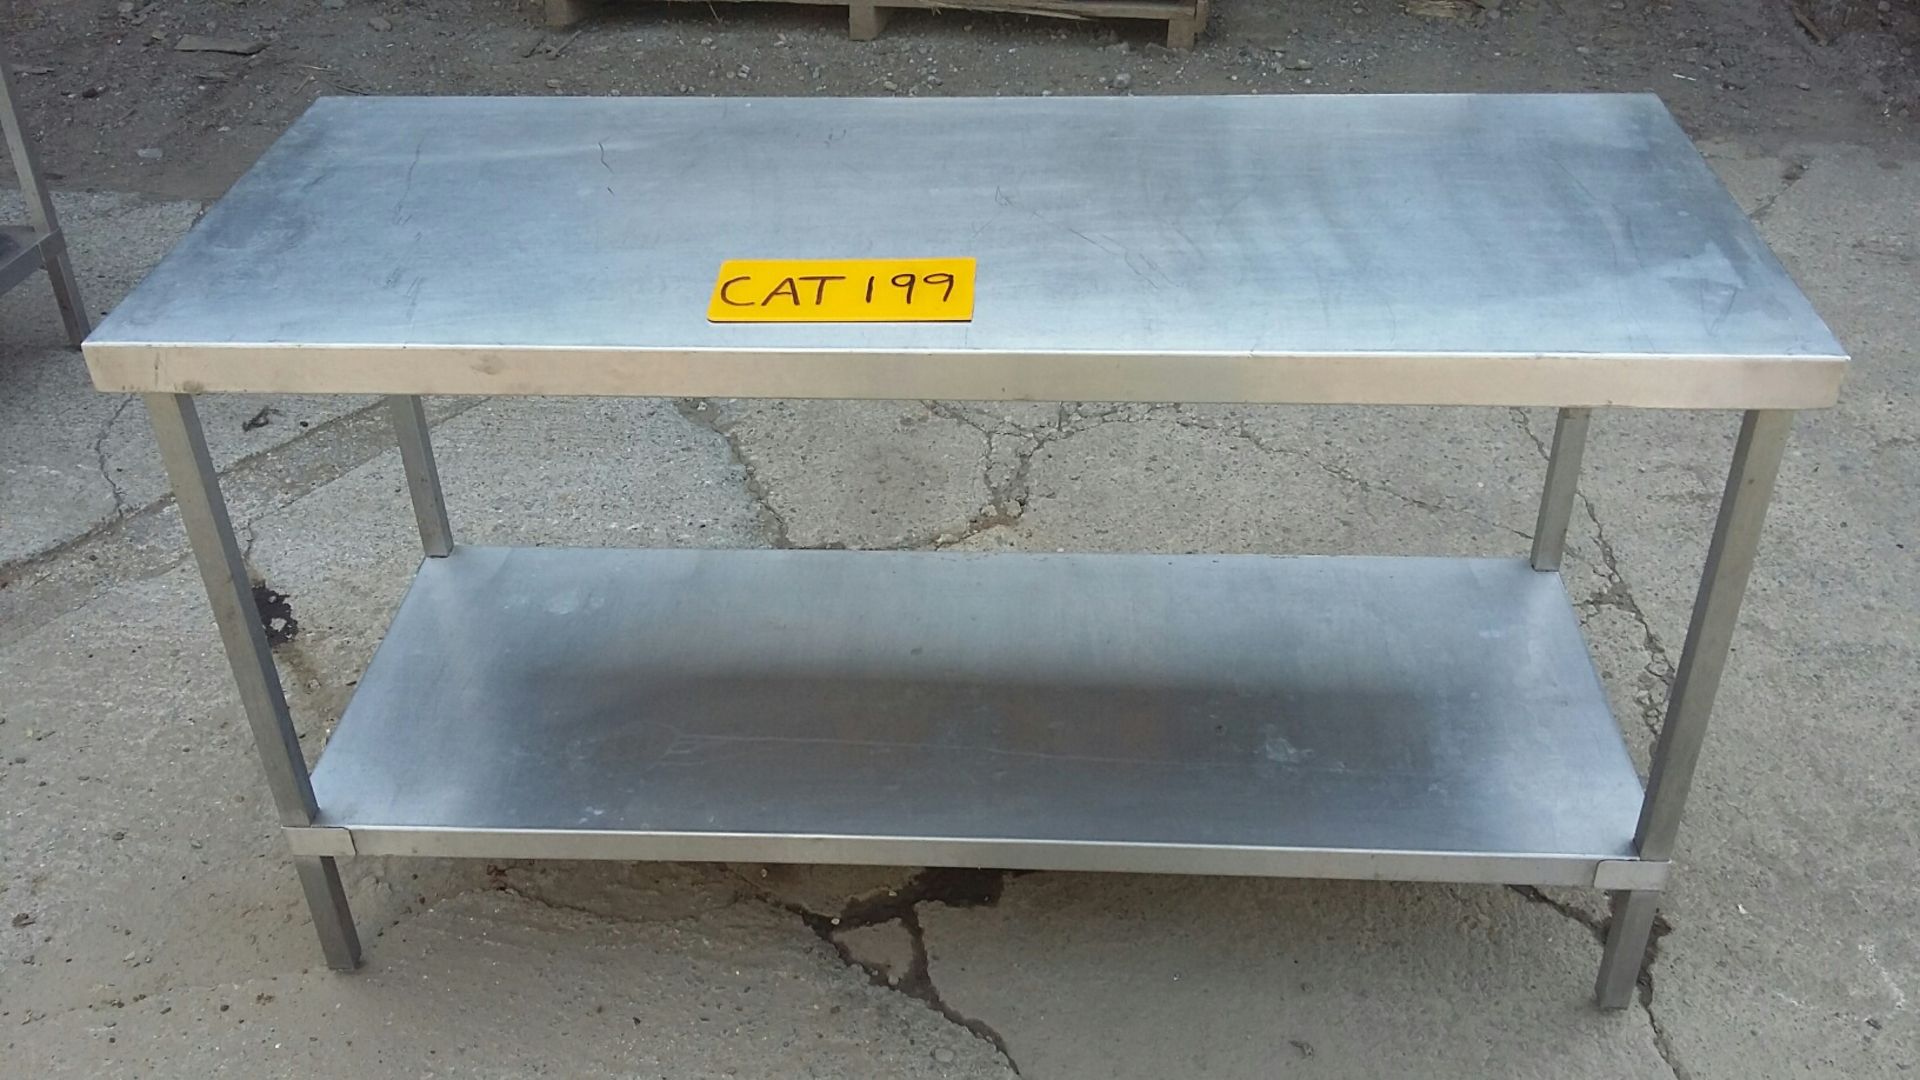 Stainless Steel Table, with one shelf, 250mm high